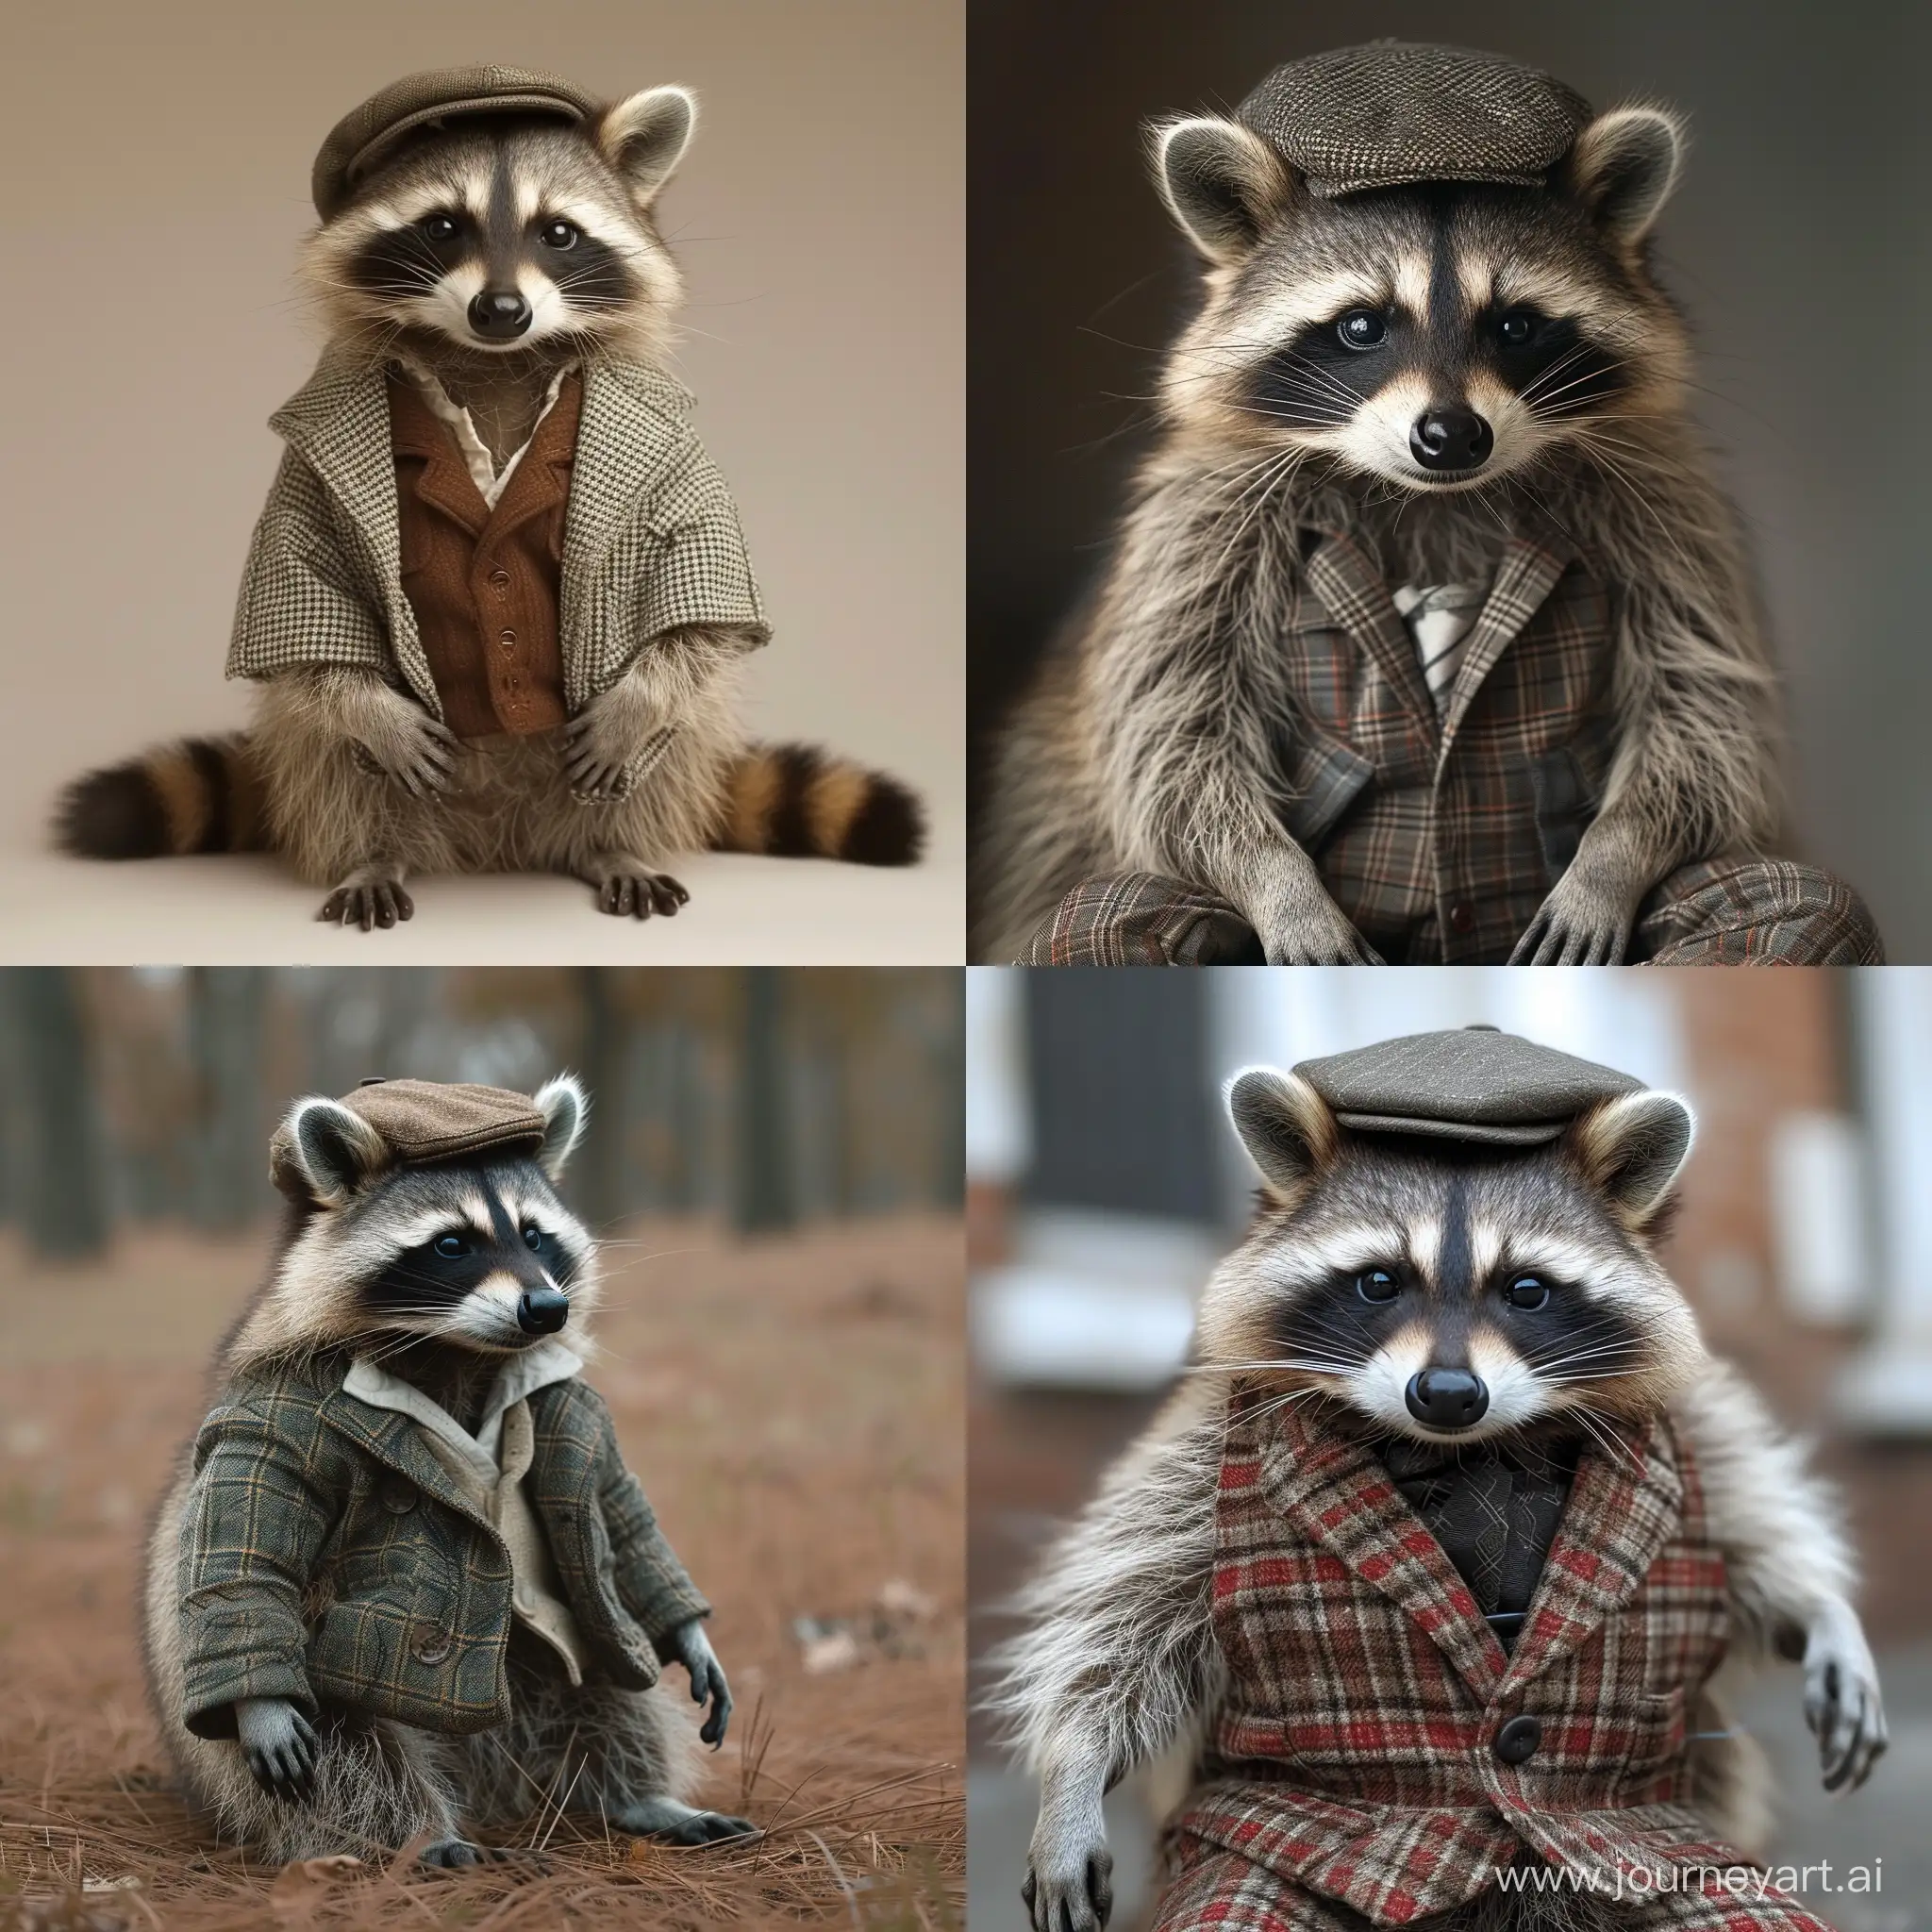 Stylish-Raccoon-in-Fashionable-Cap-and-Clothes